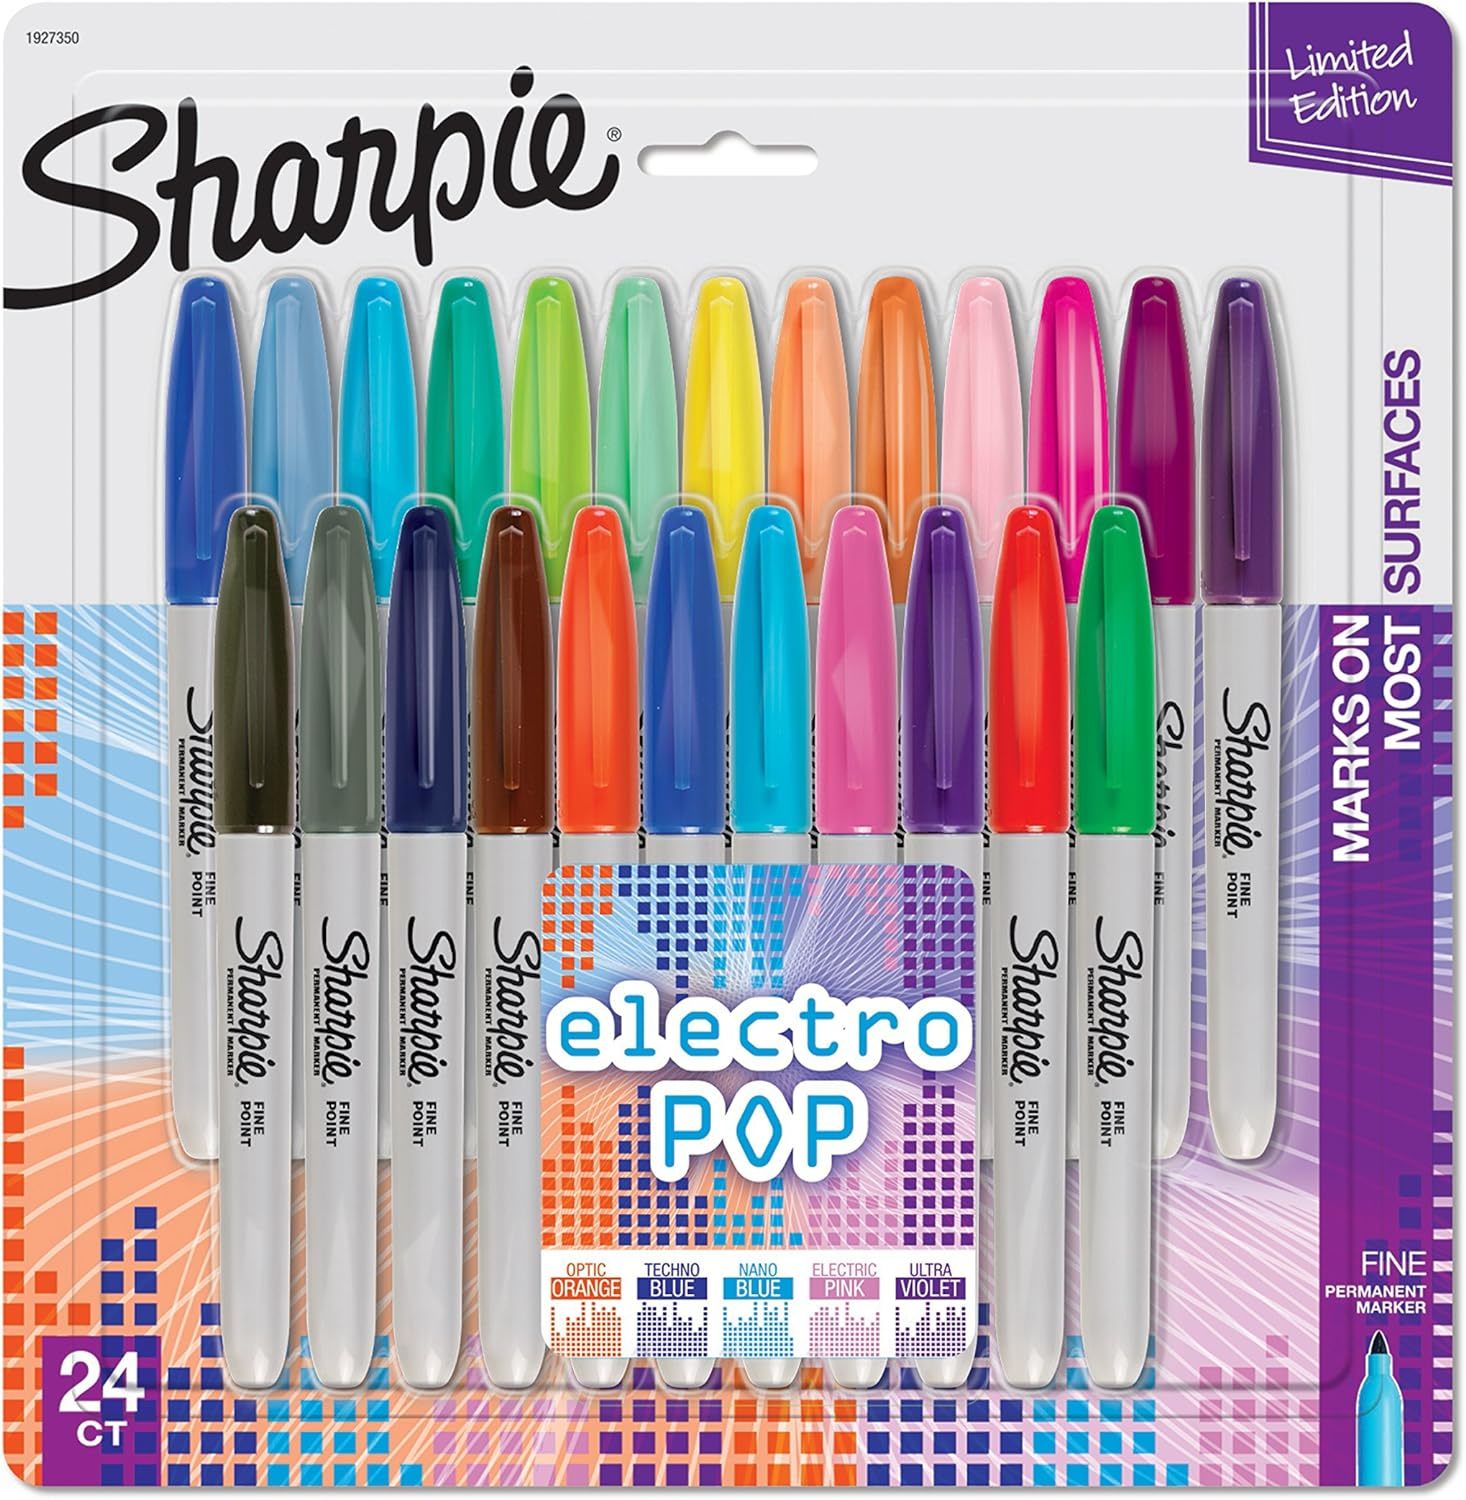 Primary image for Electro Pop Permanent Markers, Fine Point, 24 Count, Assorted, Sharpie 1927350.